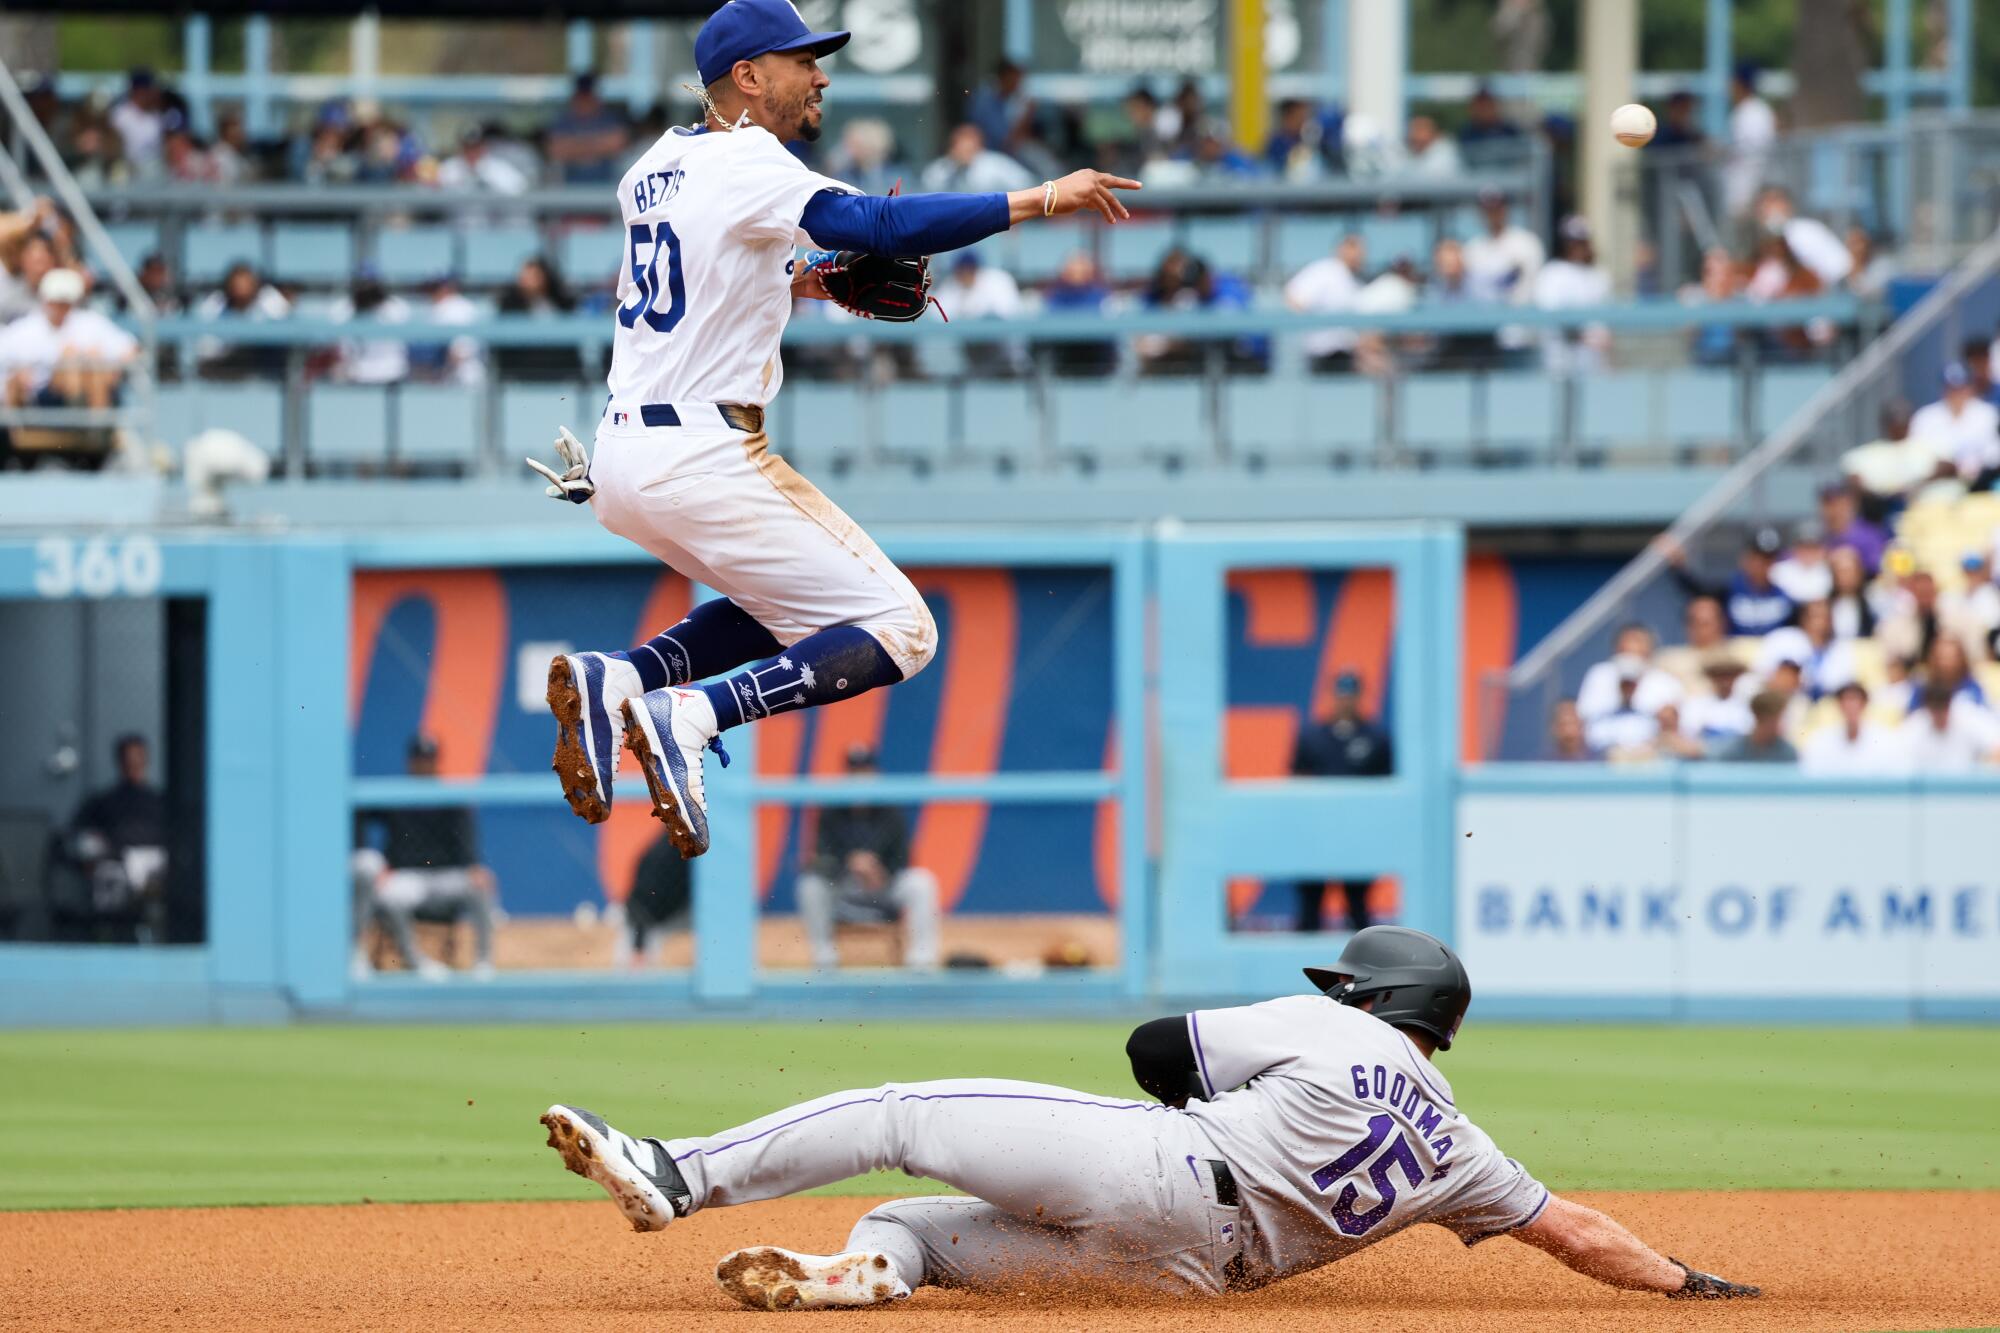 Dodgers shortstop Mookie Betts leaps over the Rockies' Hunter Goodman after throwing to first base in a game on June 2.